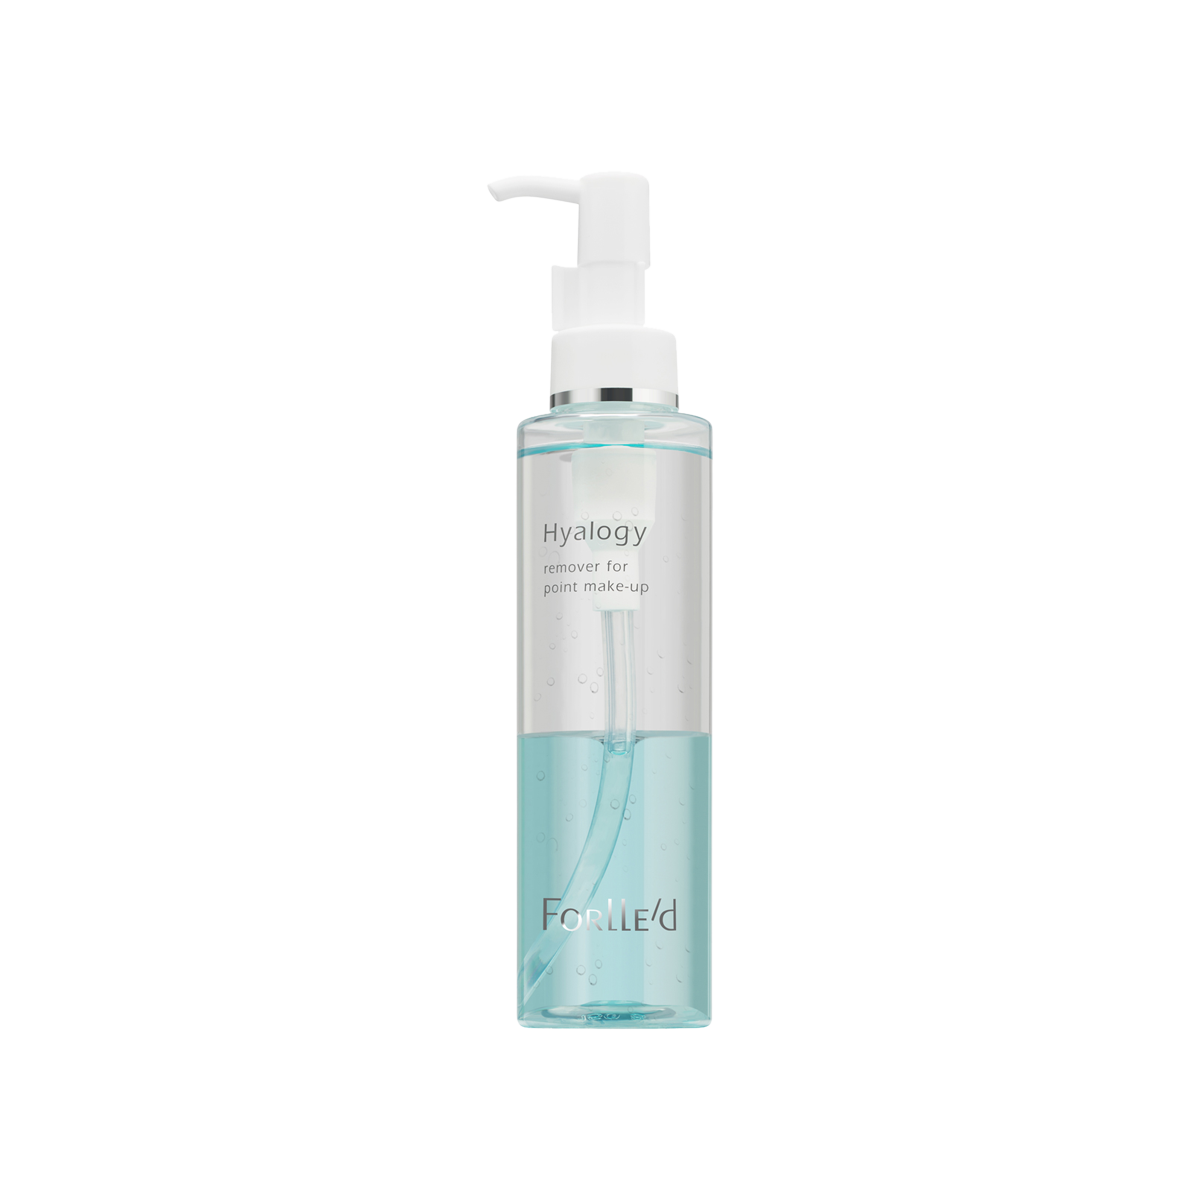 Forlle'd - Hyalogy Remover For Point Make-Up